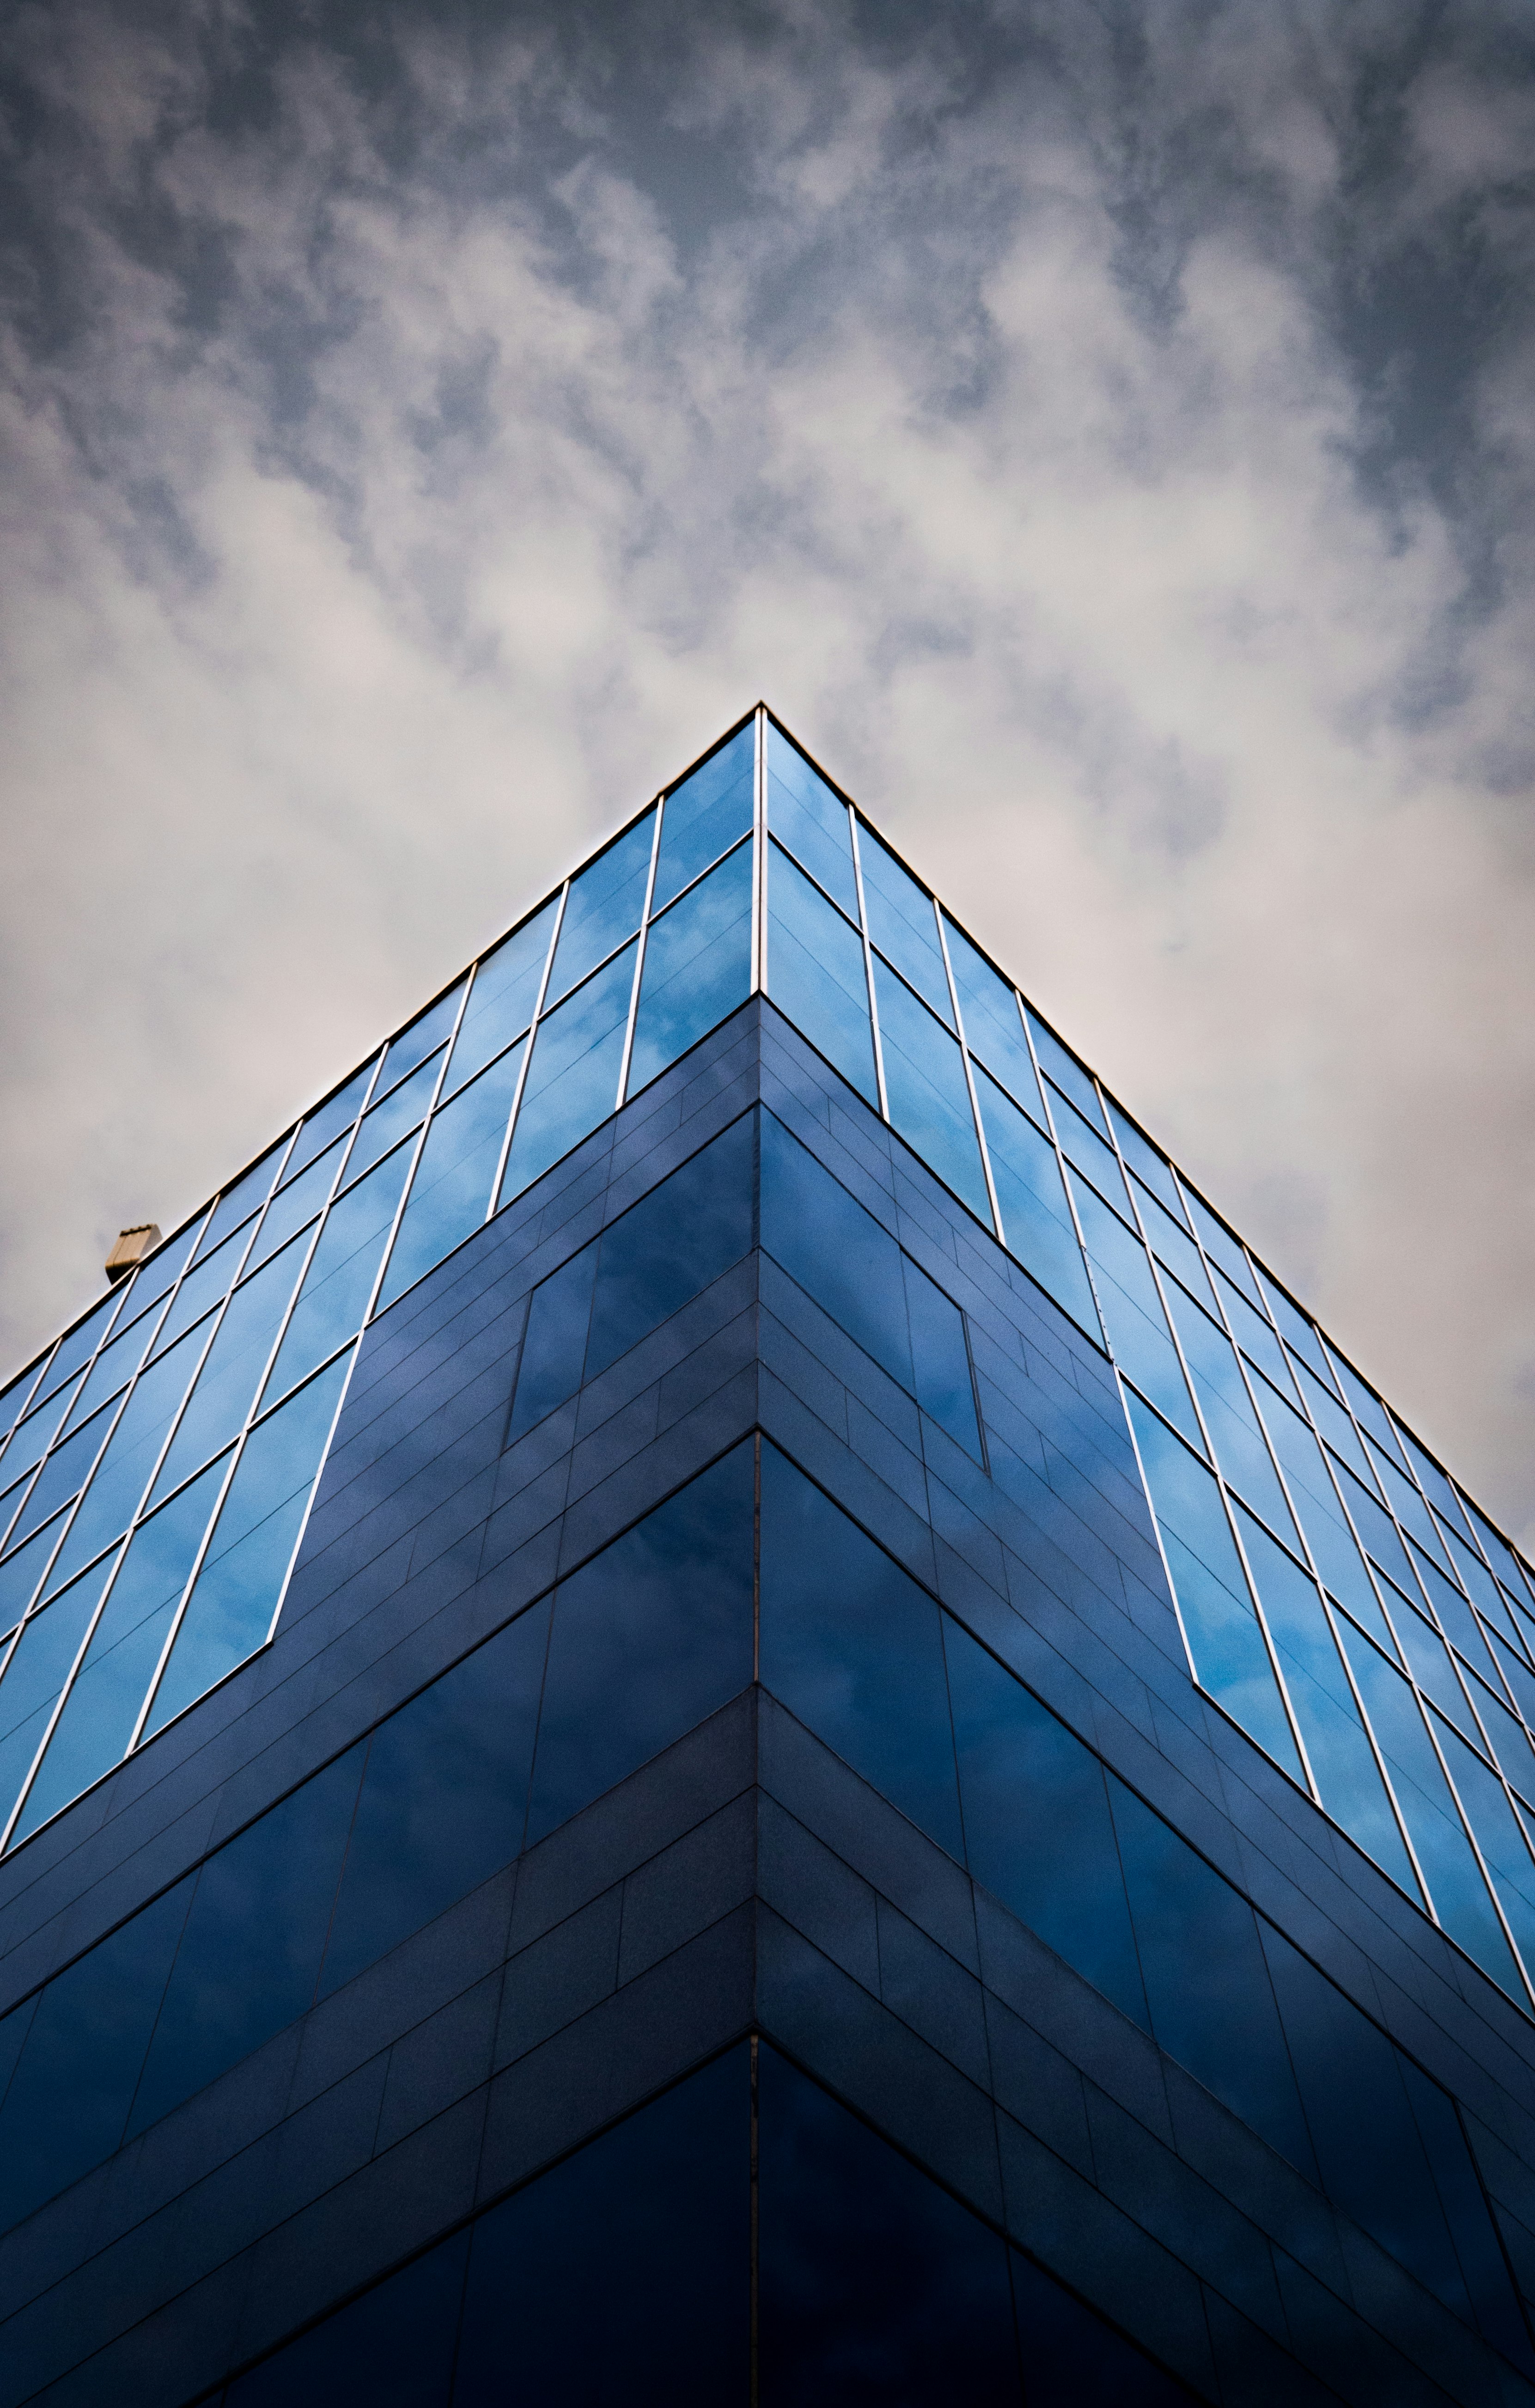 worm view photo of blue building under cloudy sky